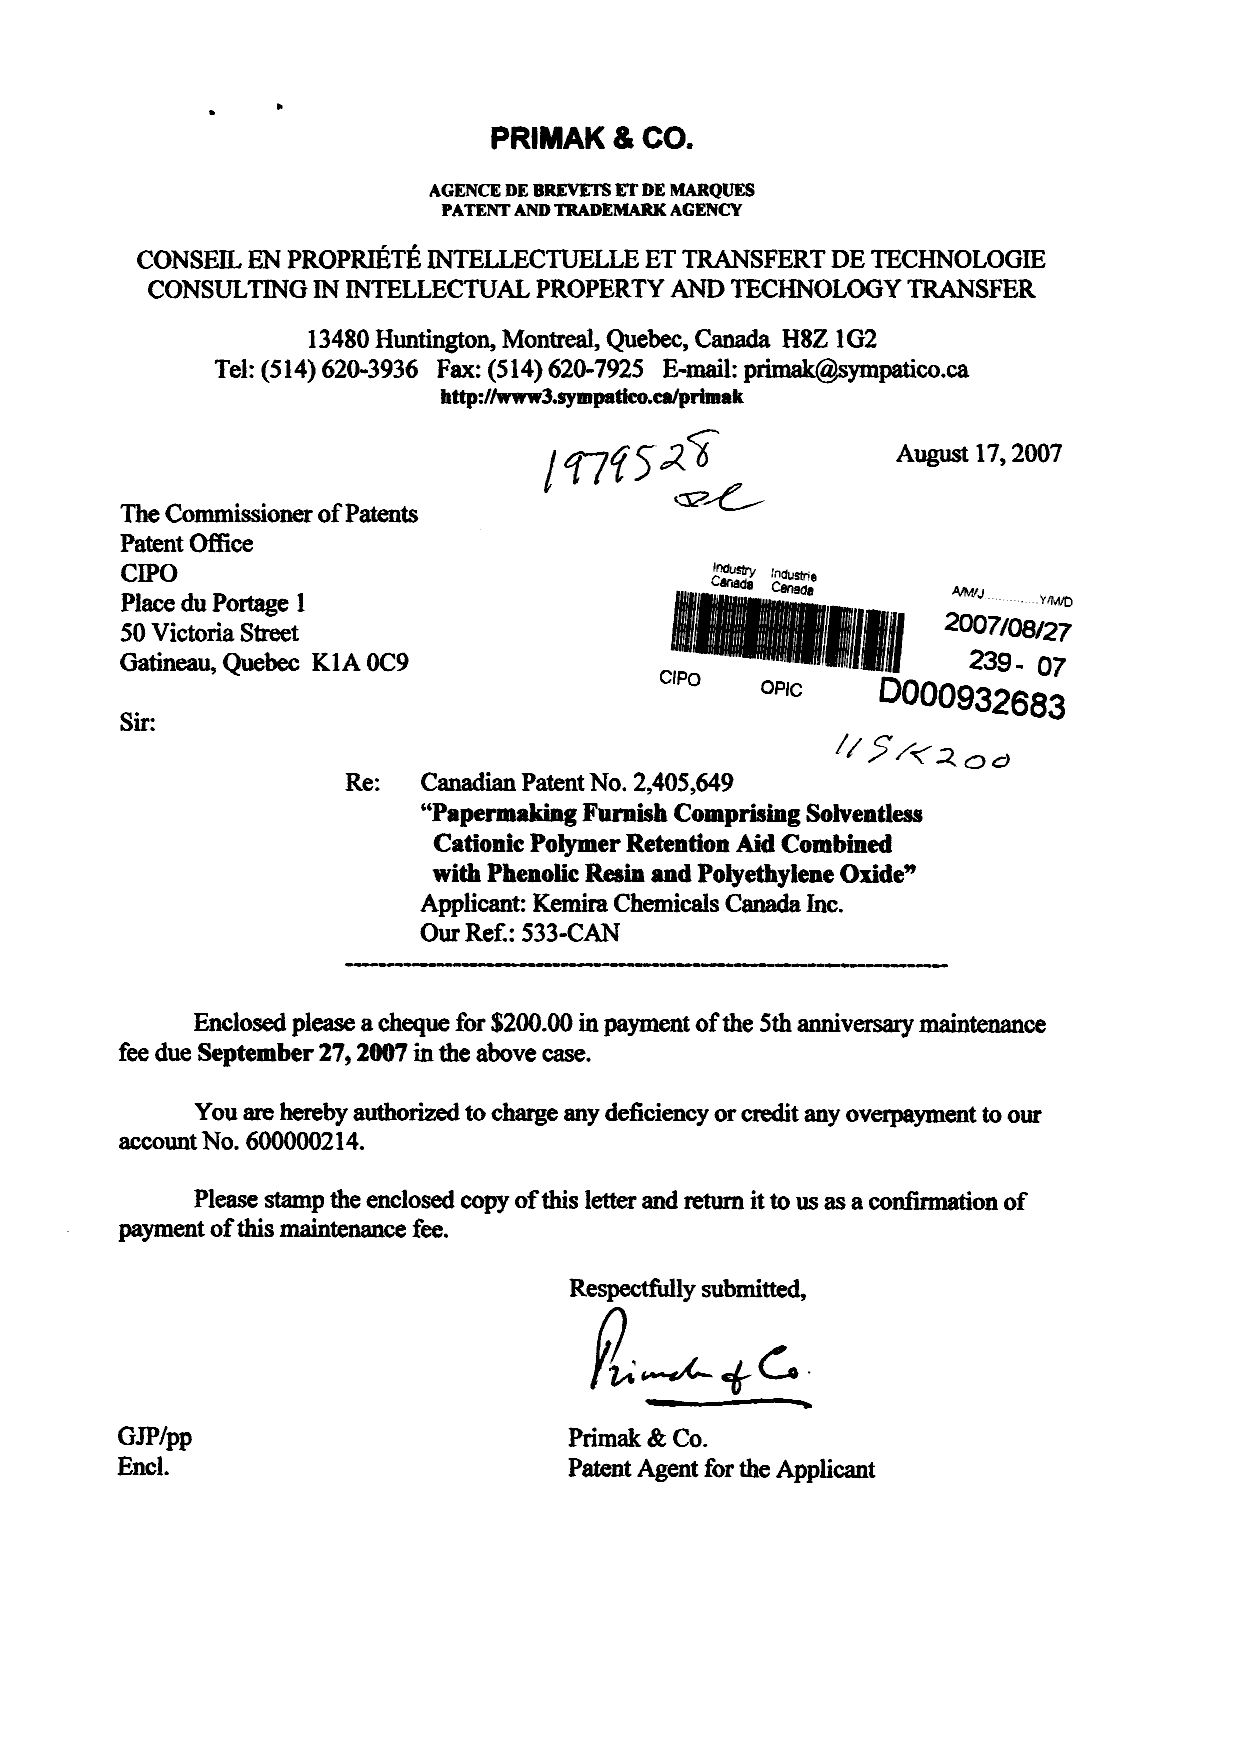 Canadian Patent Document 2405649. Fees 20070827. Image 1 of 1